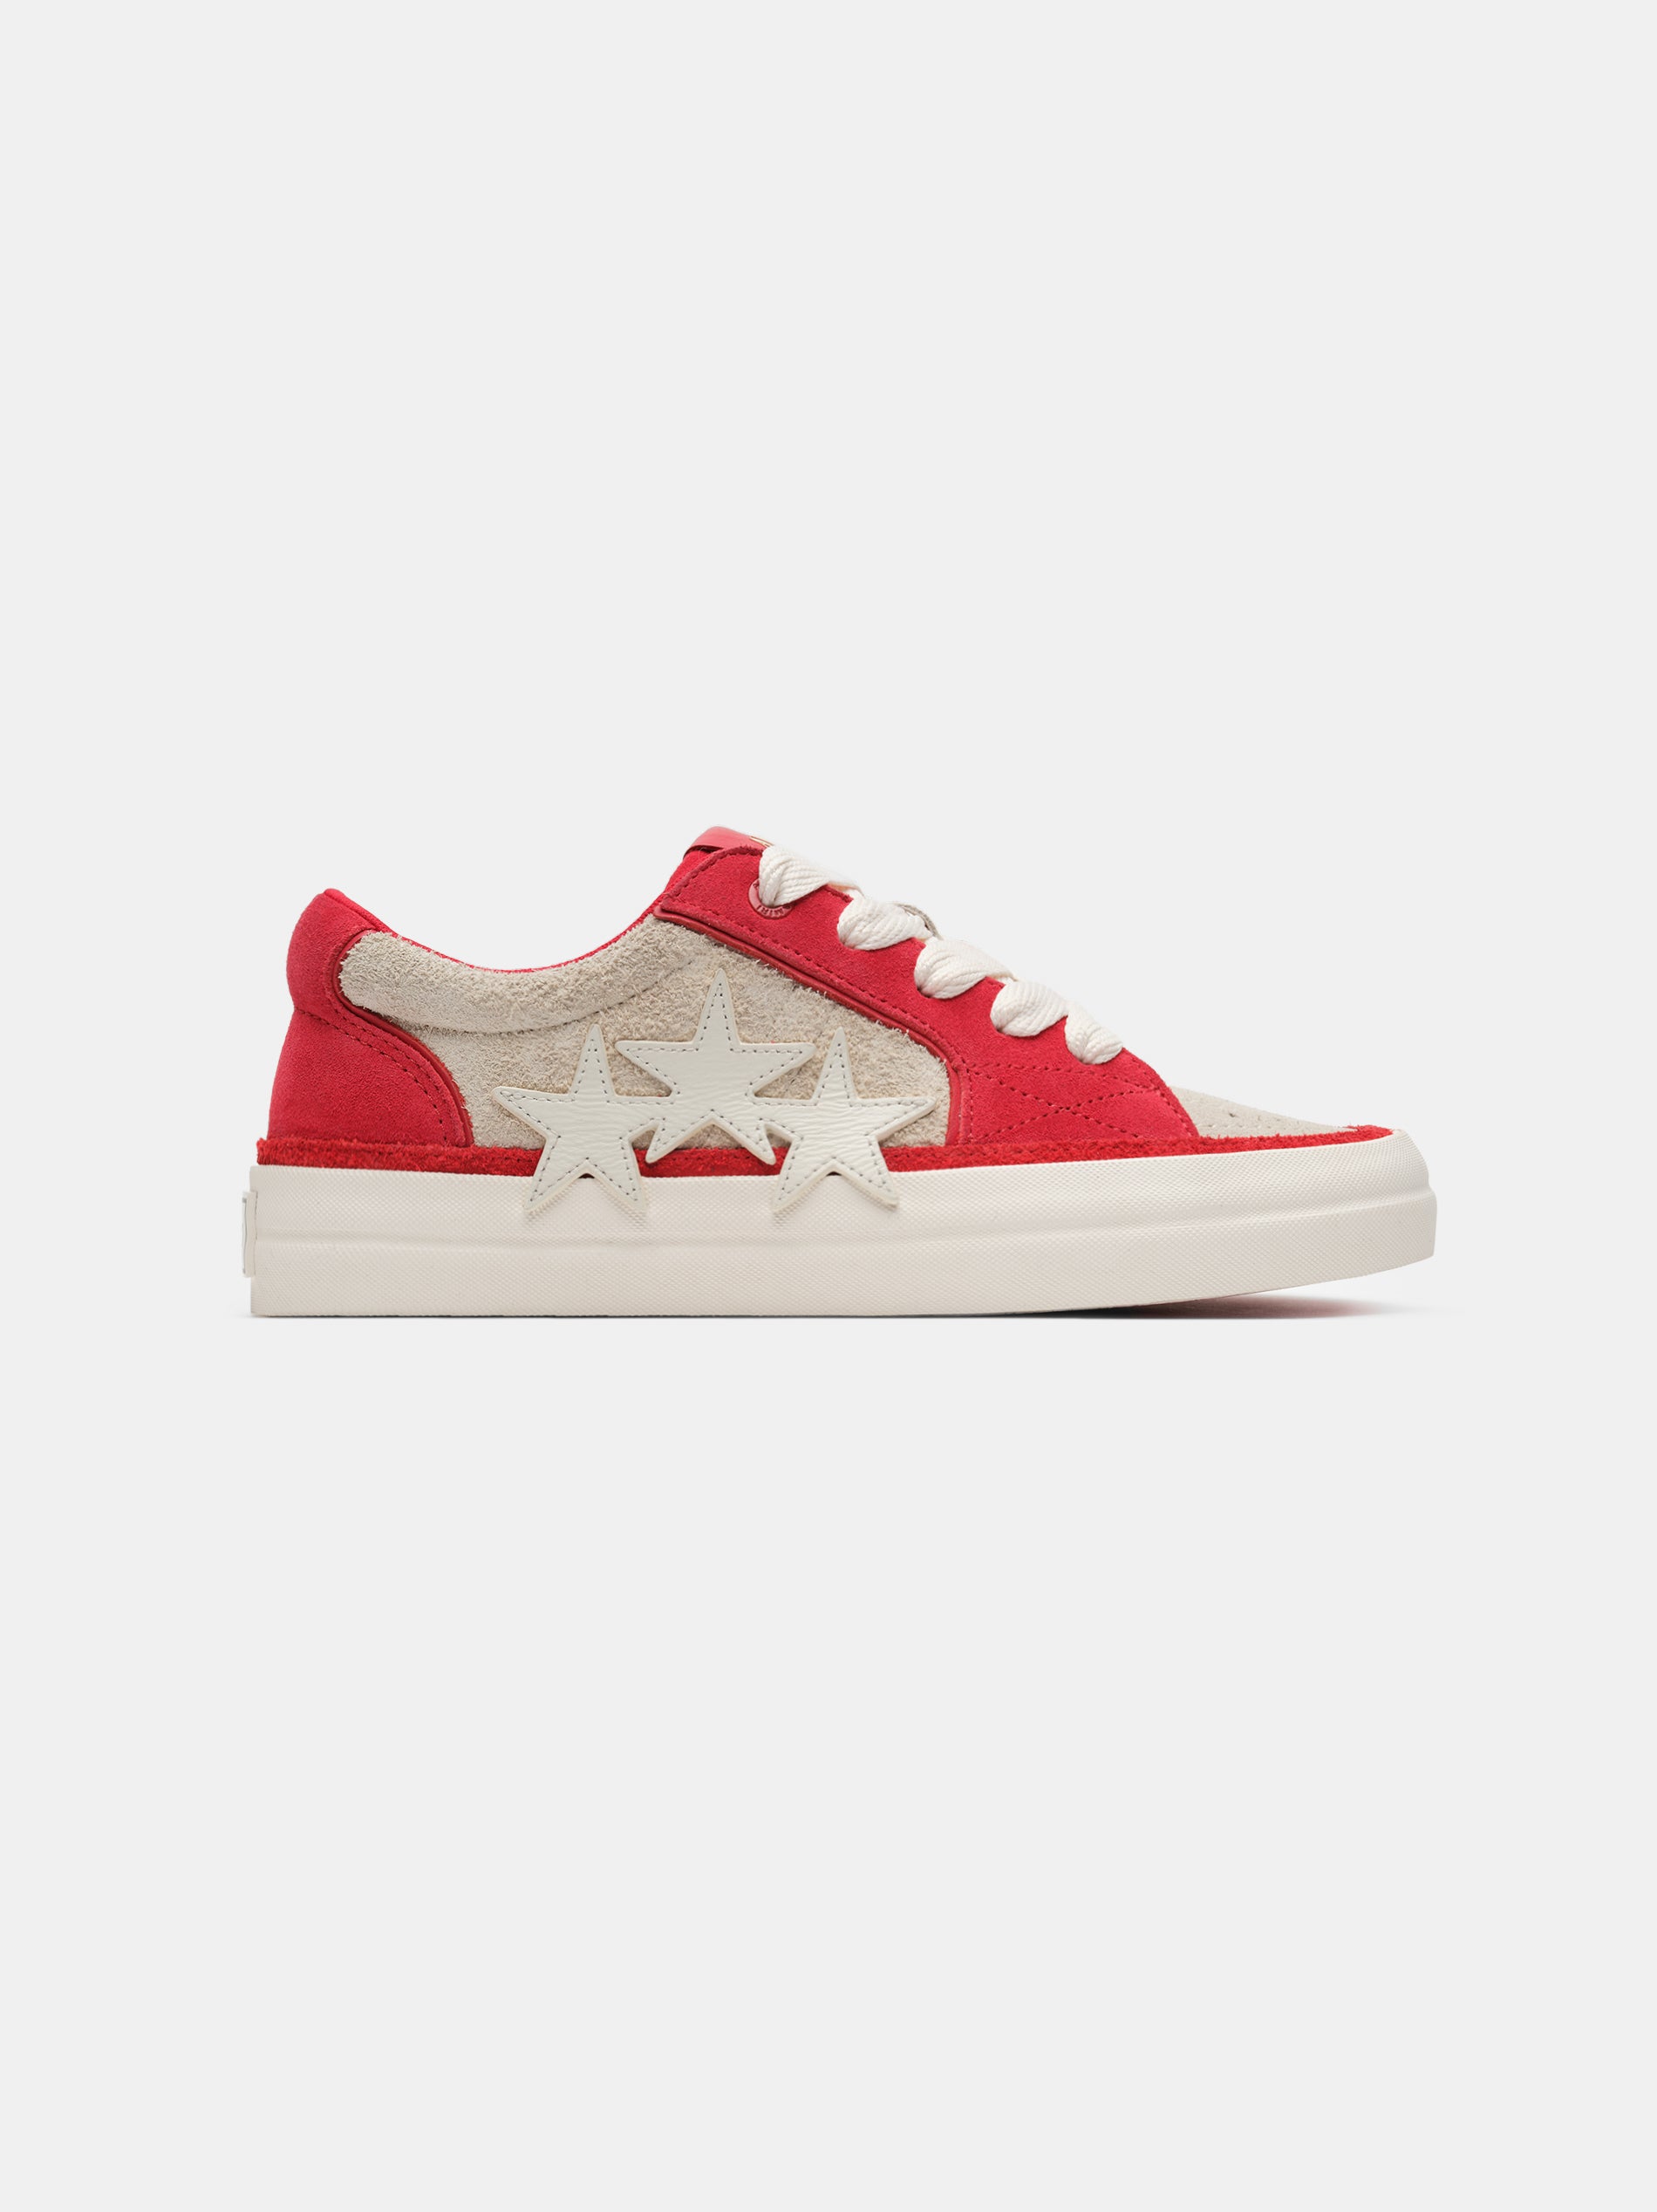 Product SUNSET SKATE LOW - Birch Red featured image